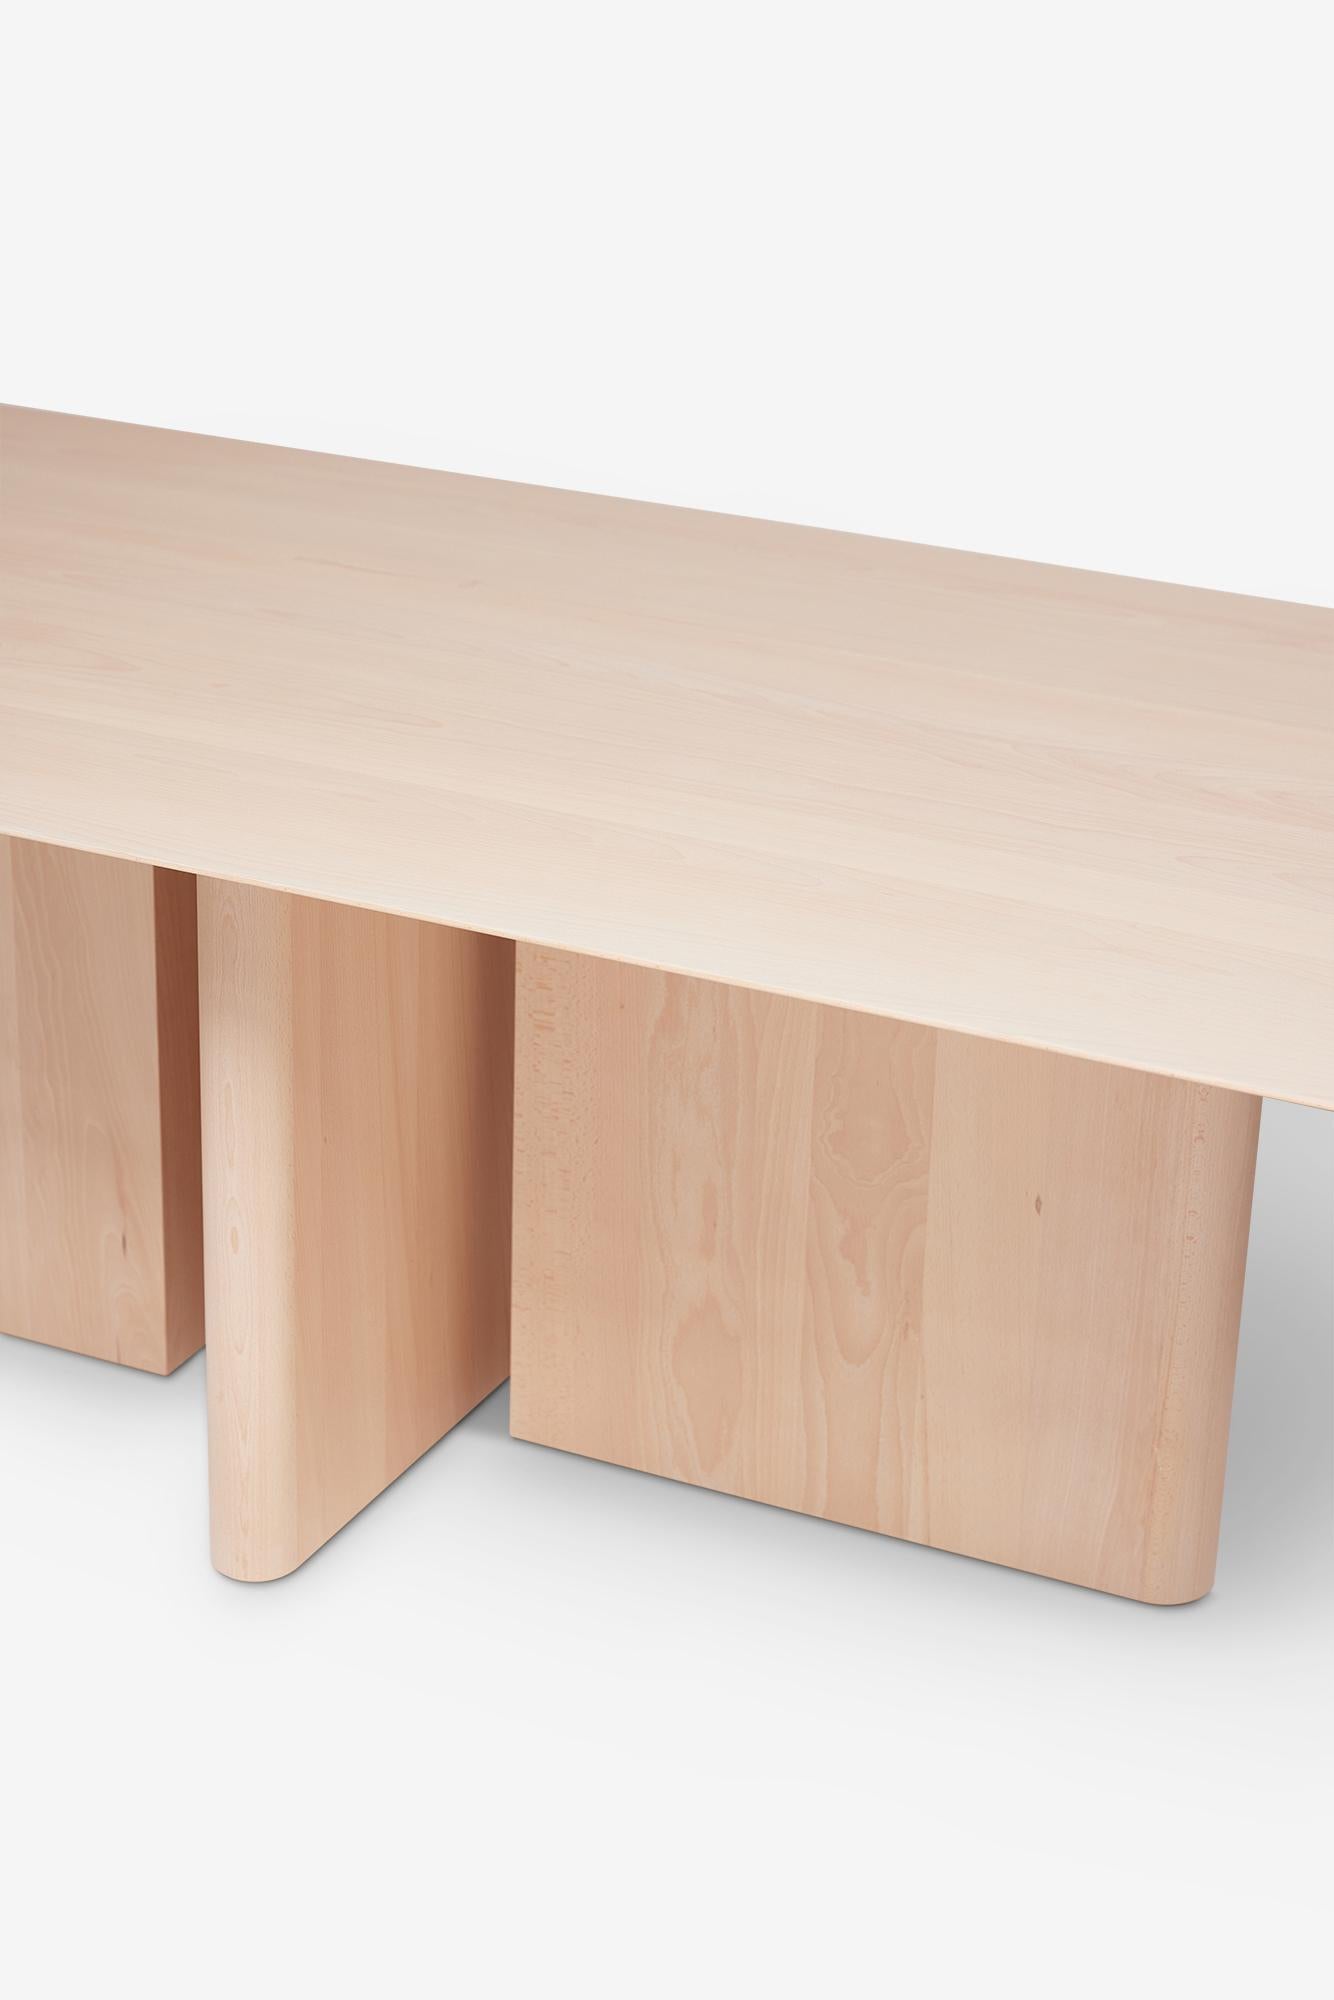 Contemporary MG210 Dining Table in Danish beech by Malte Gormsen design by Norm Architects For Sale